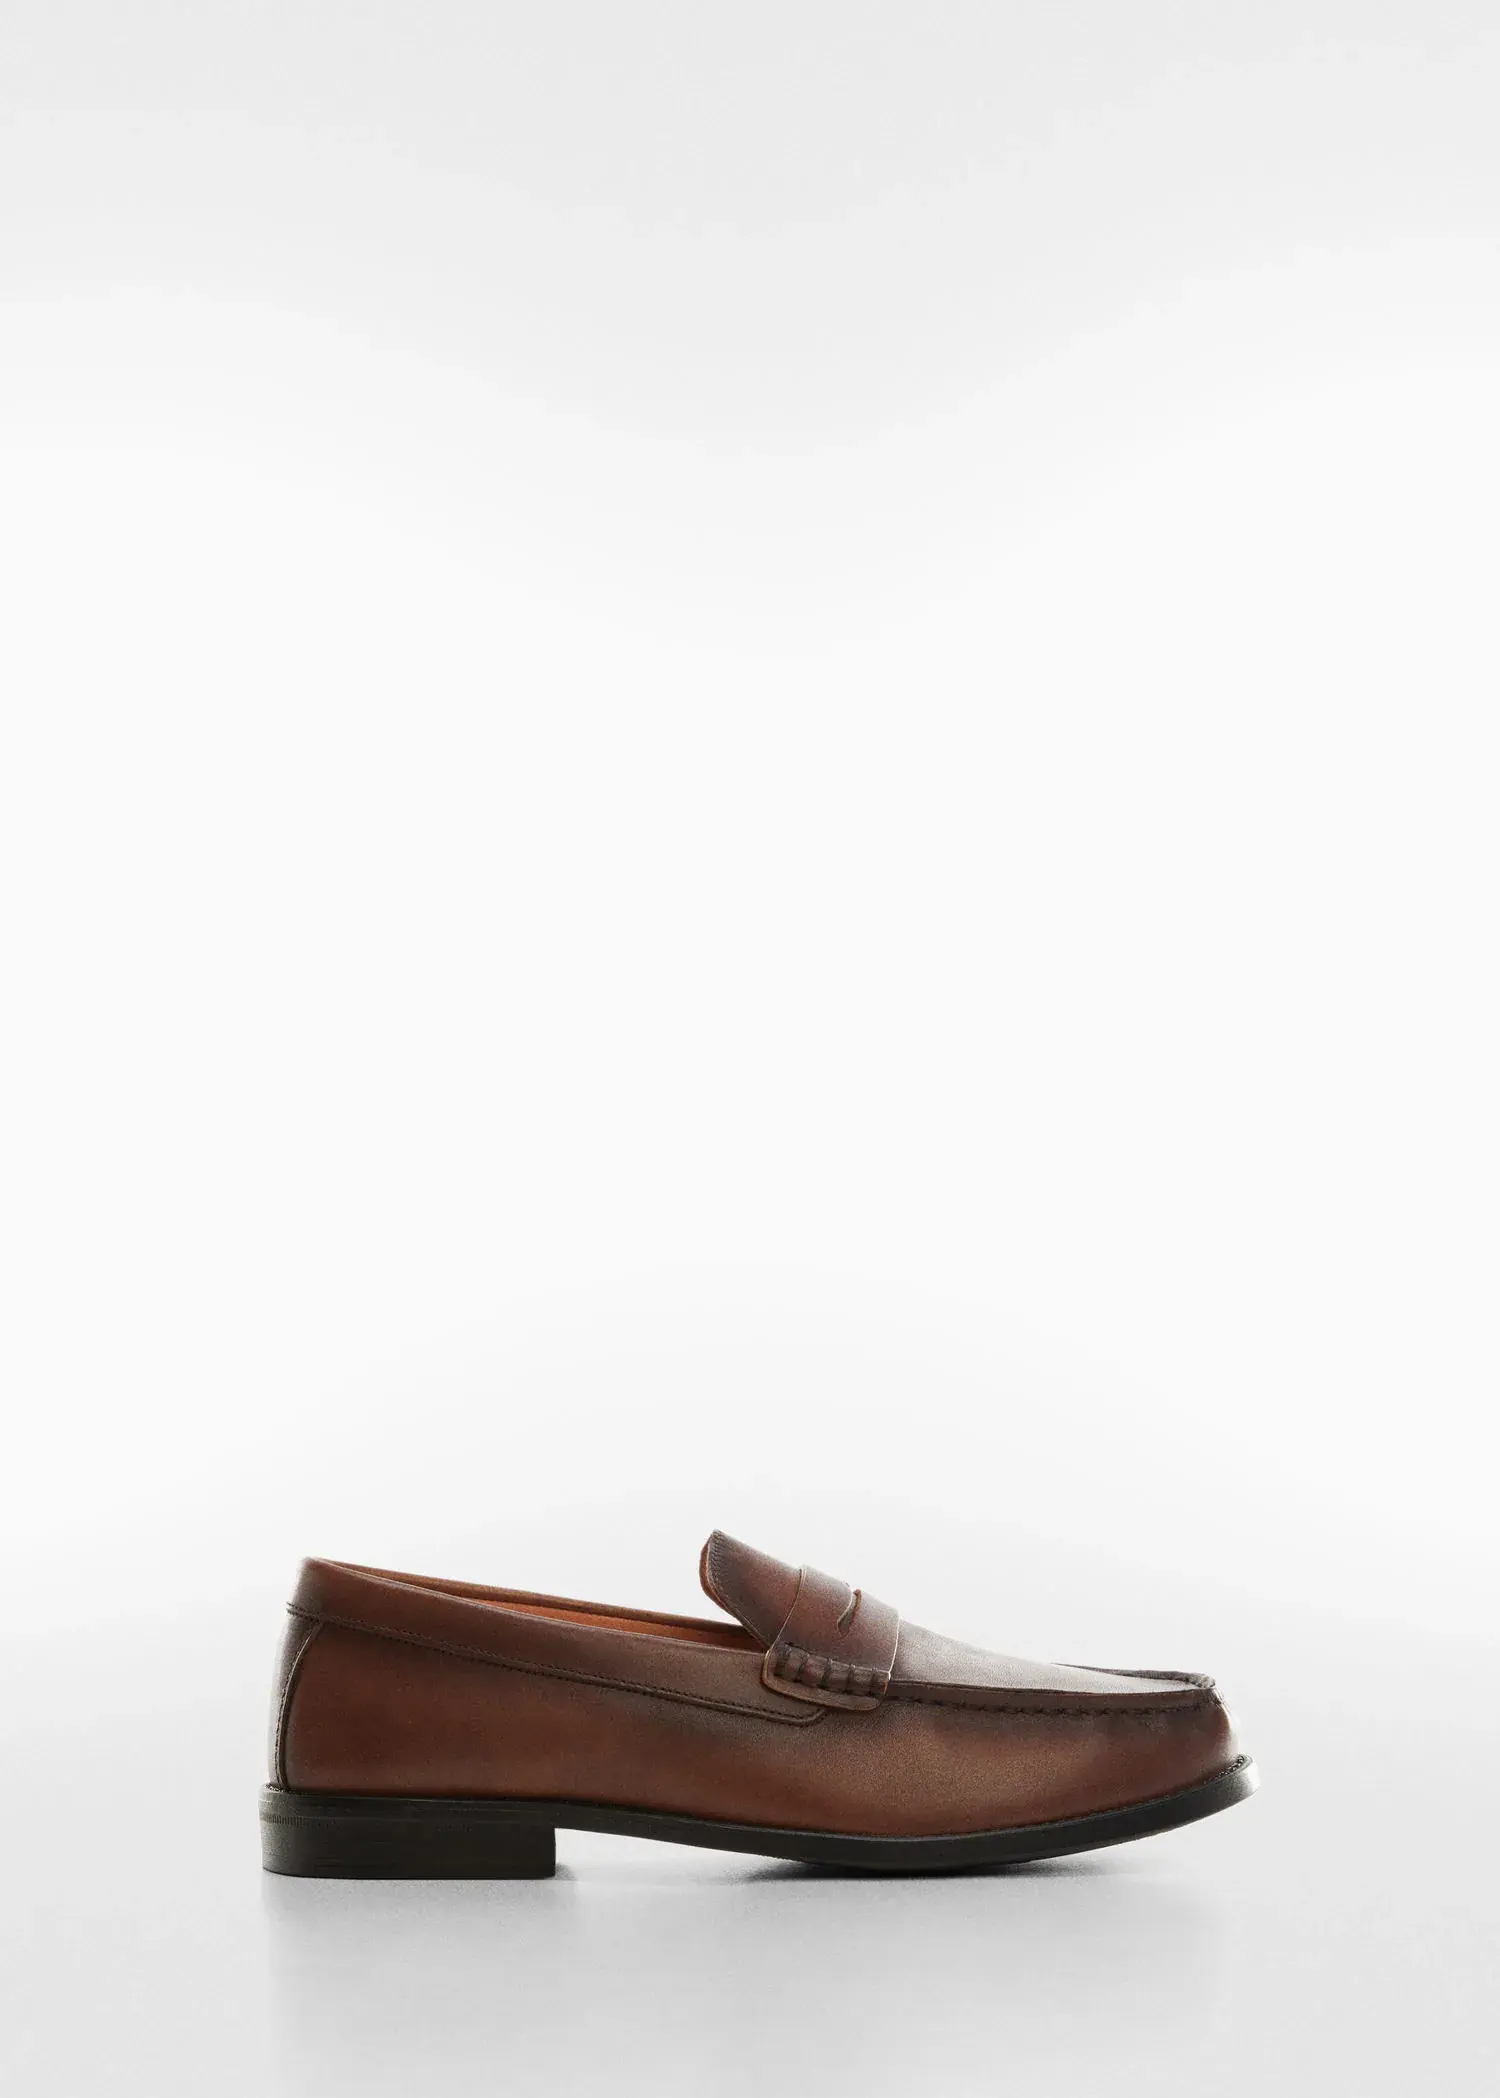 Mango Leather penny loafers. a brown loafer shoe on a white background. 